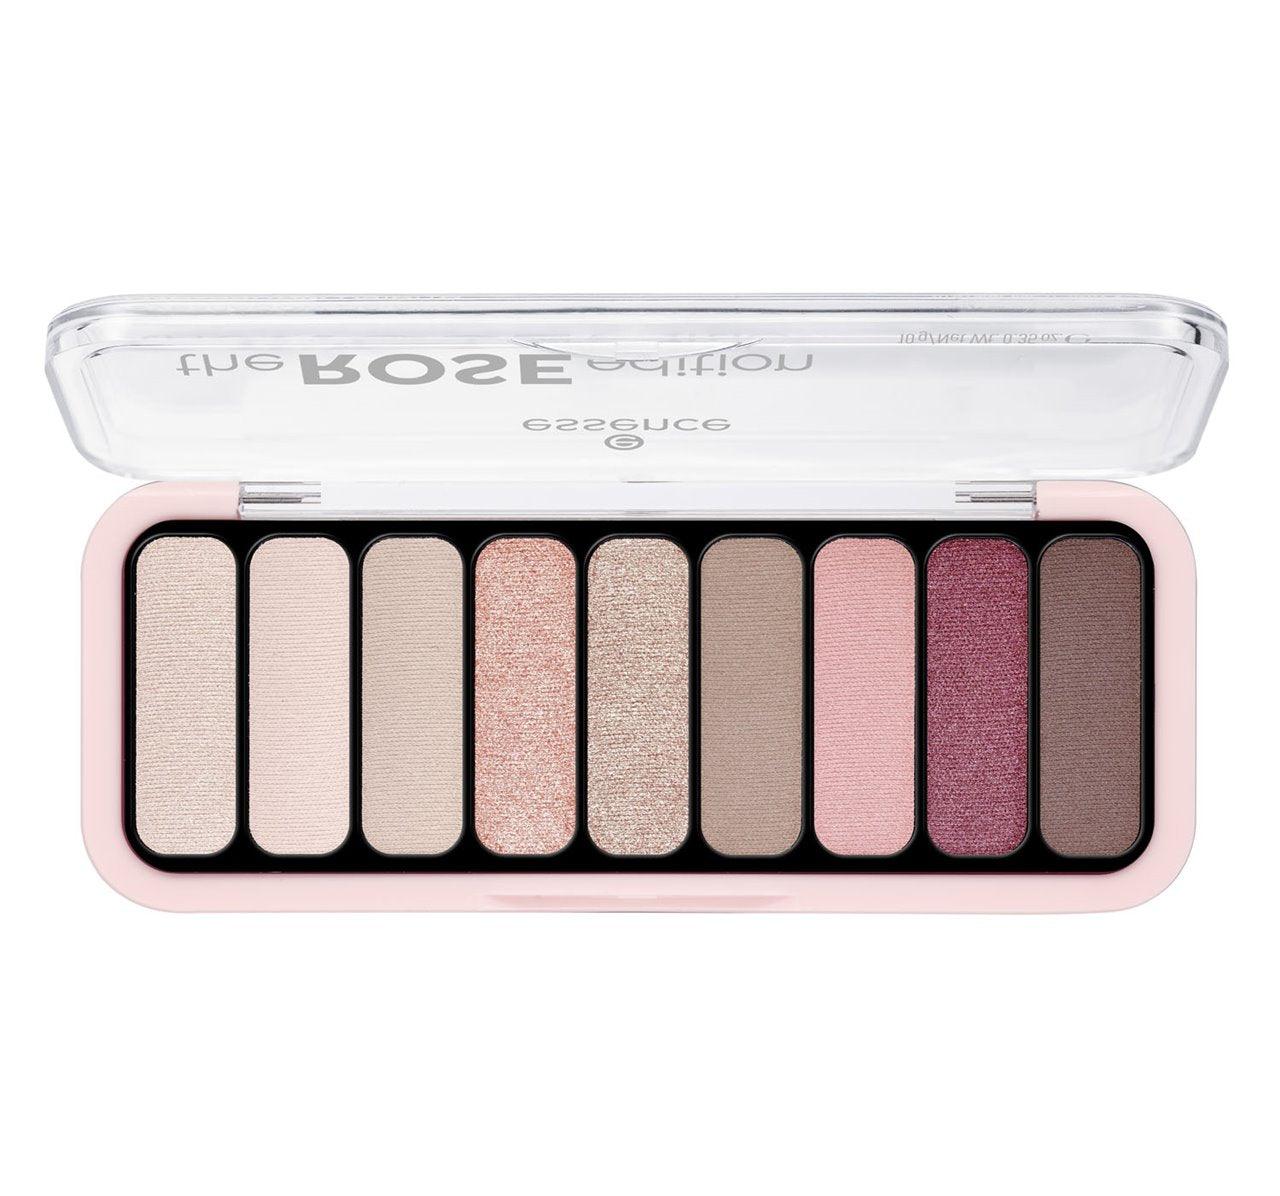 Essence the ROSE edition eyeshadow palette 20 Lovely In Rose 10g - Beauty Bounty